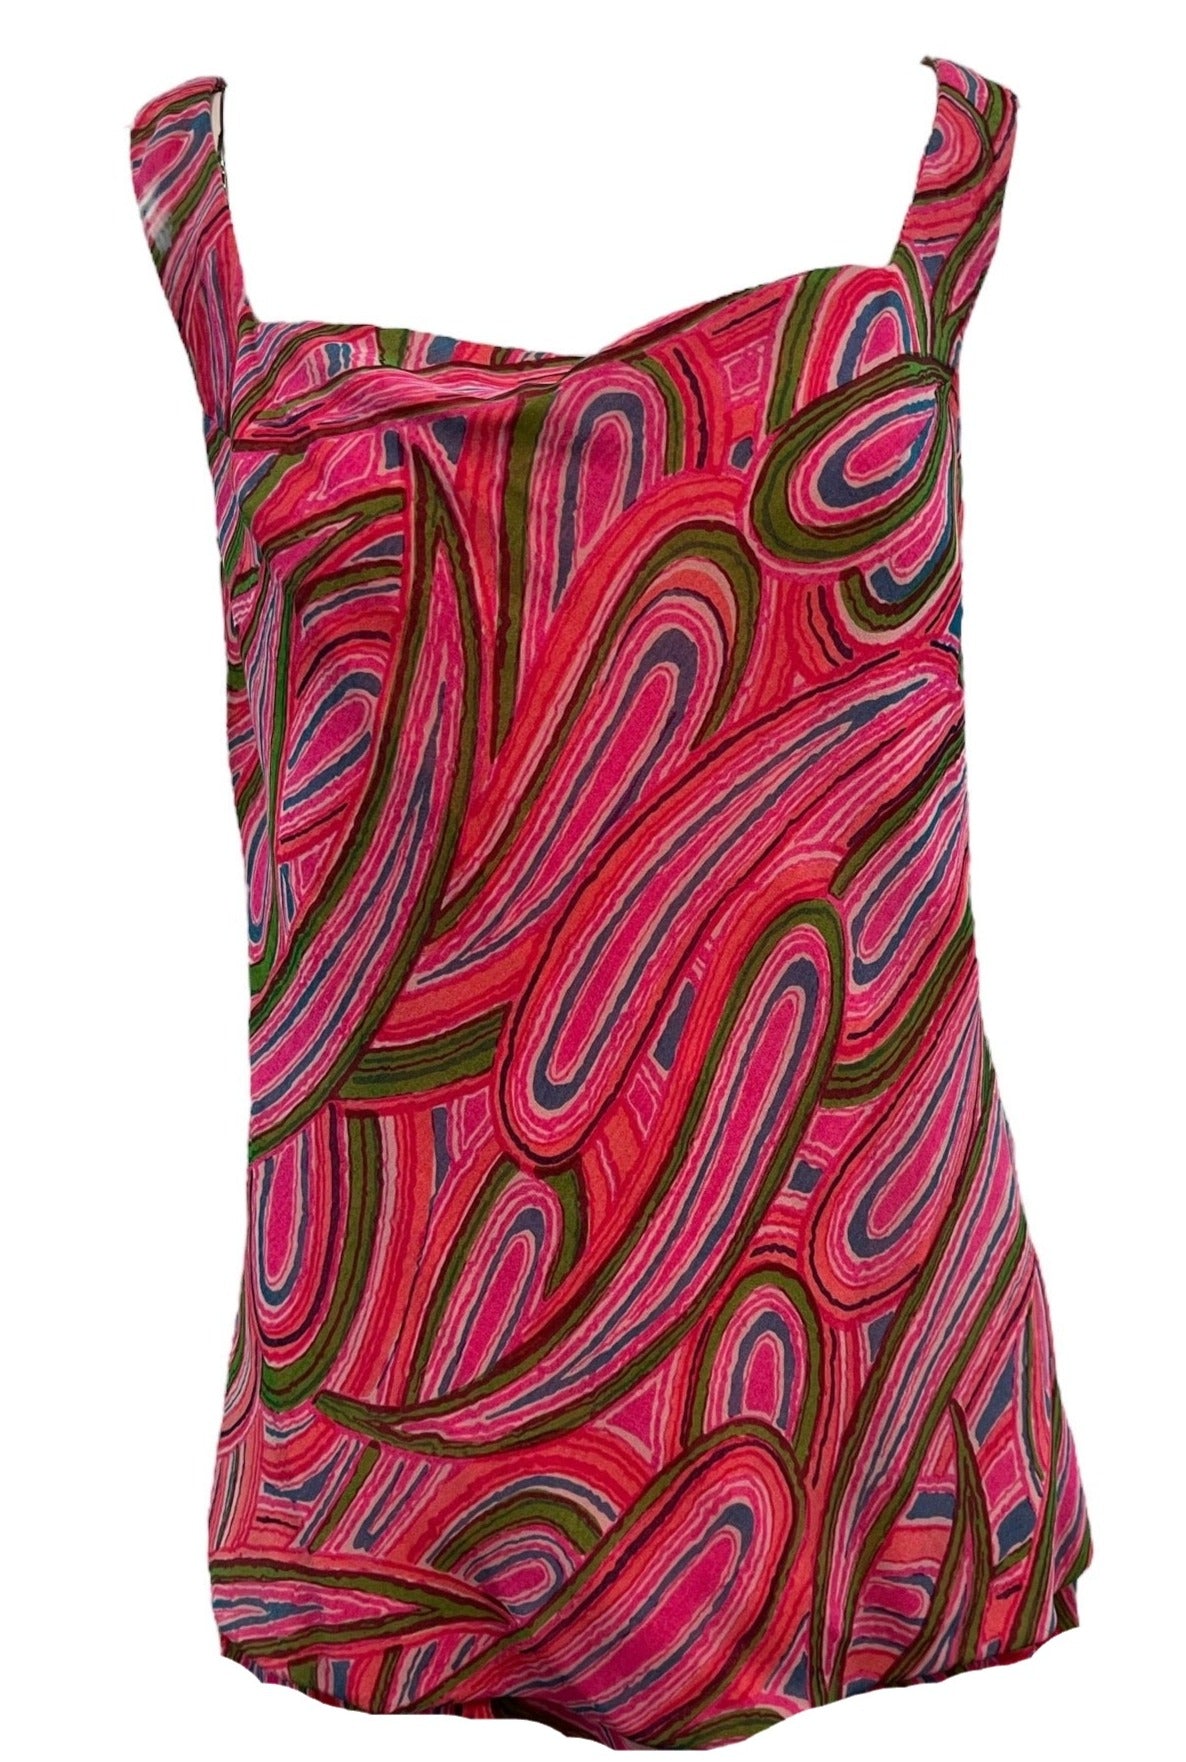 Joan Leslie 60s Mod Psychedelic Chiffon Party Dress TOP 5 of 7